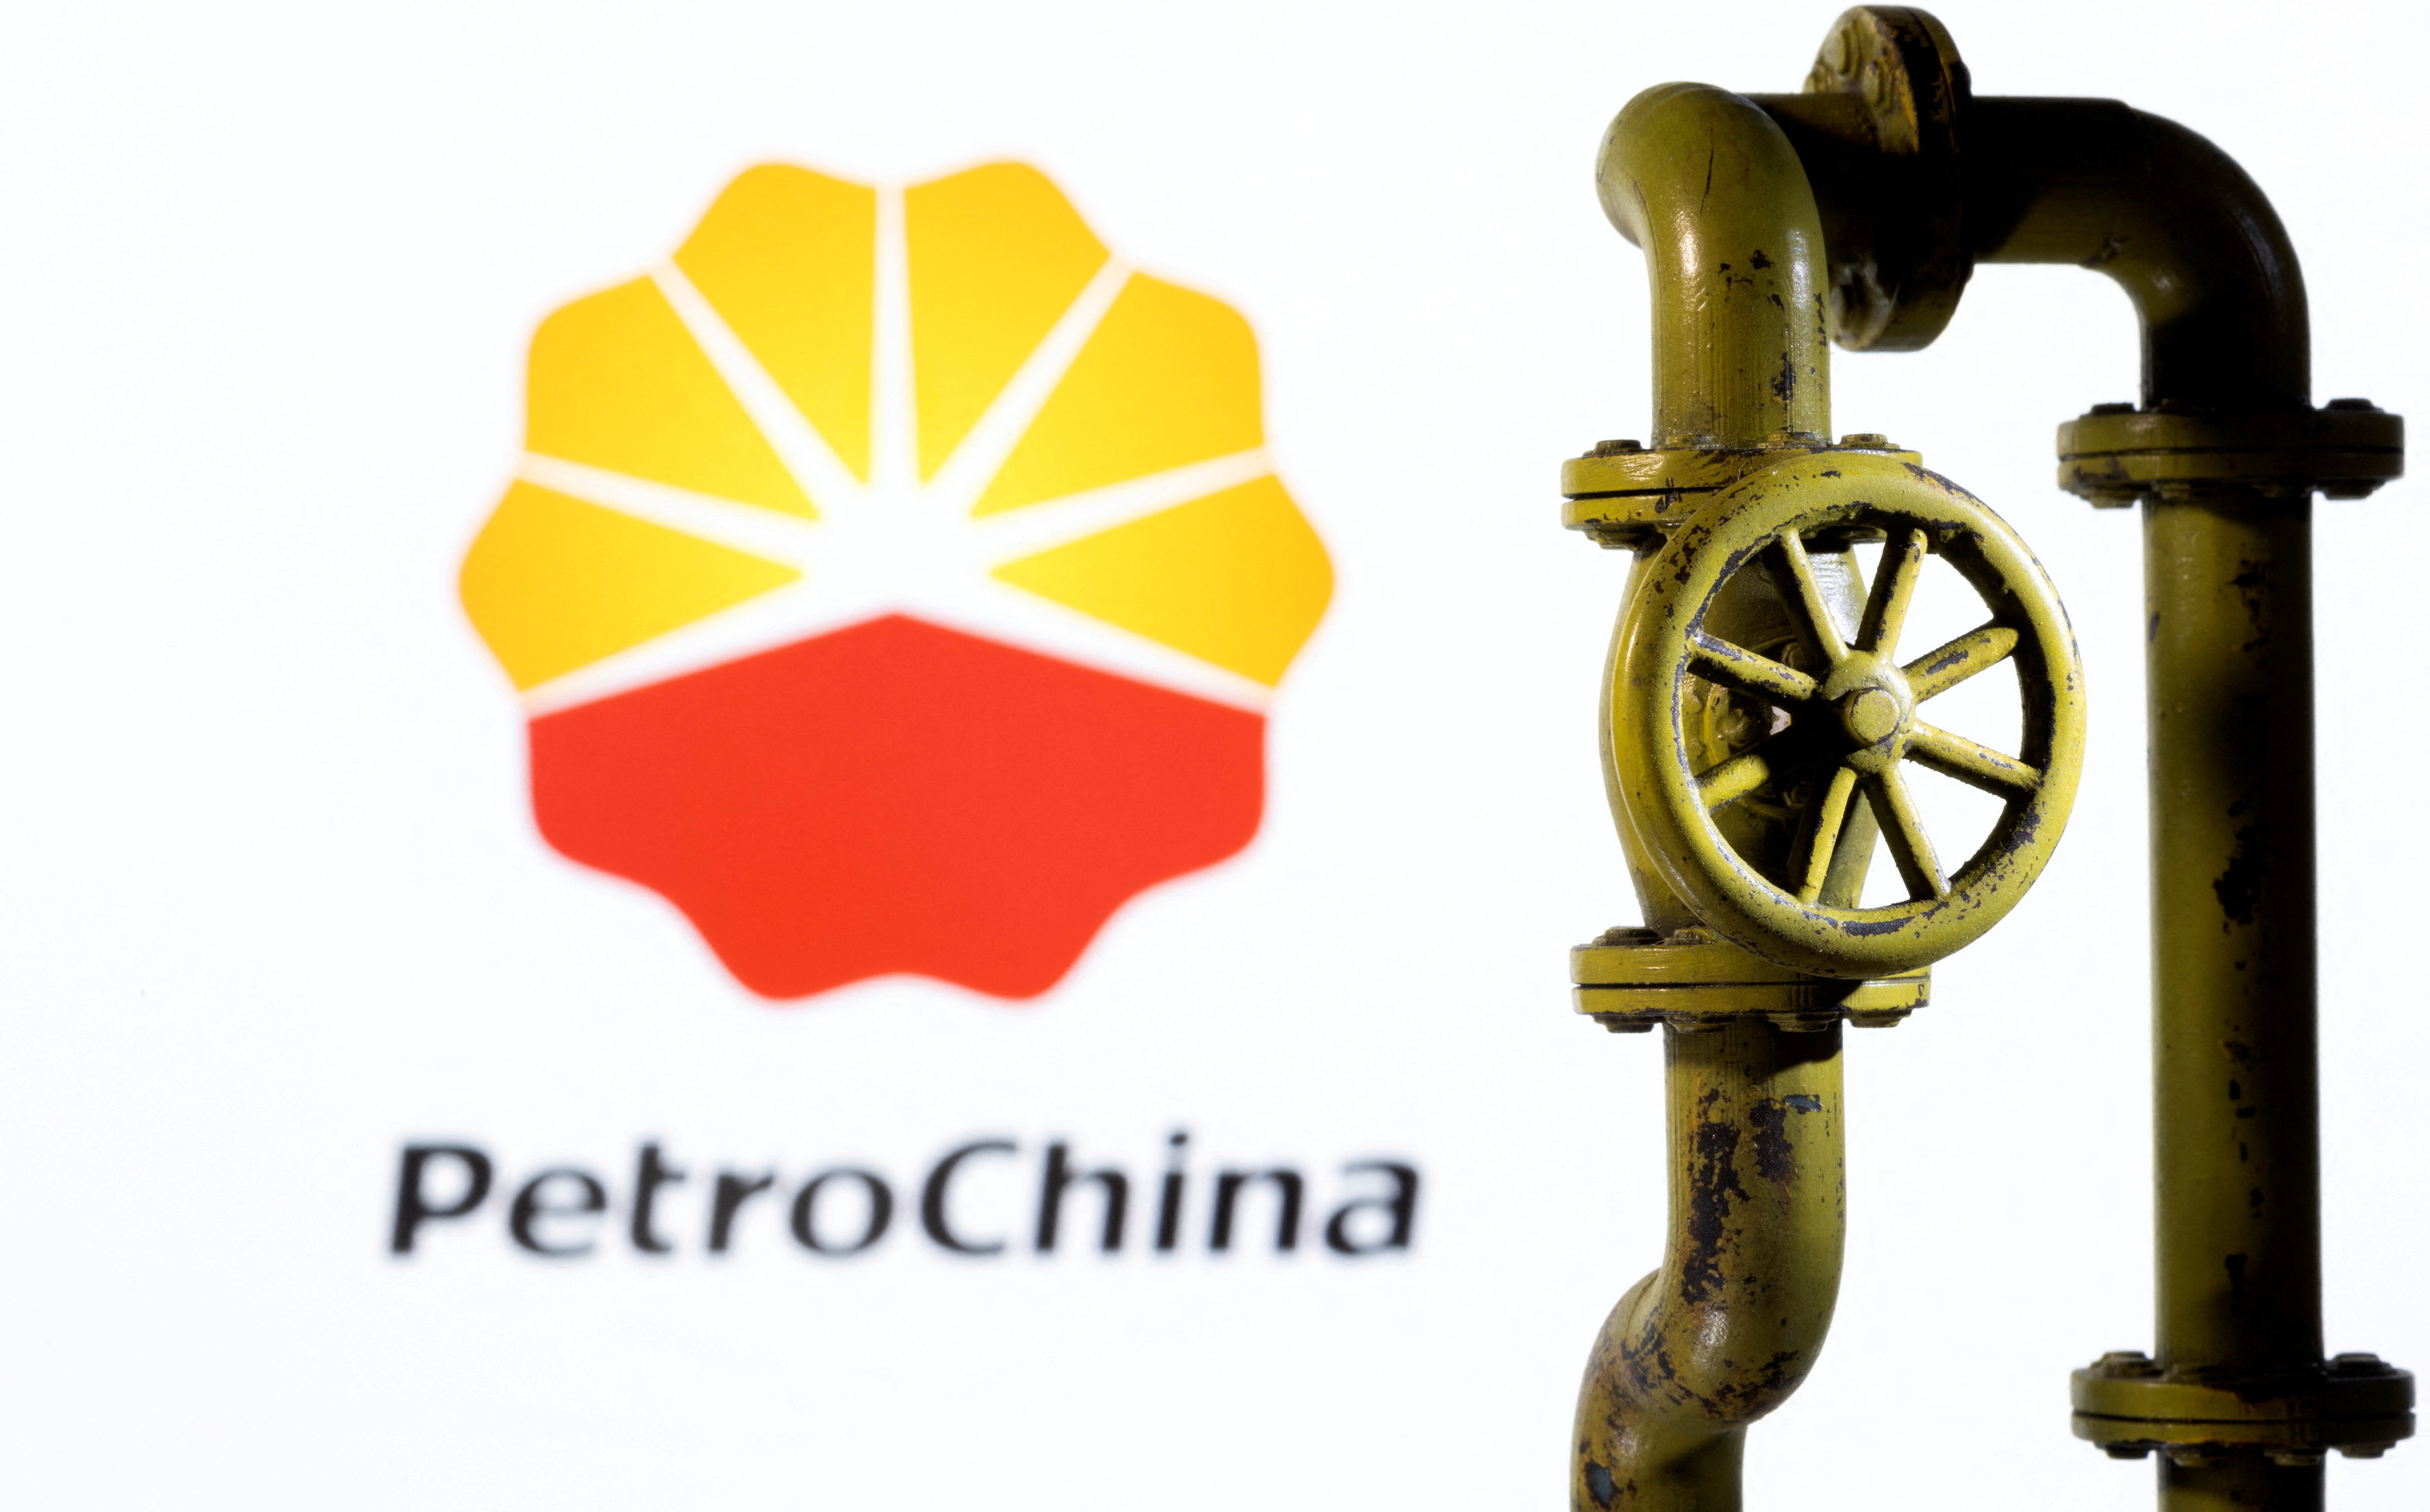 PetroChina signs LNG deal with Malaysia's Petronas Reuters